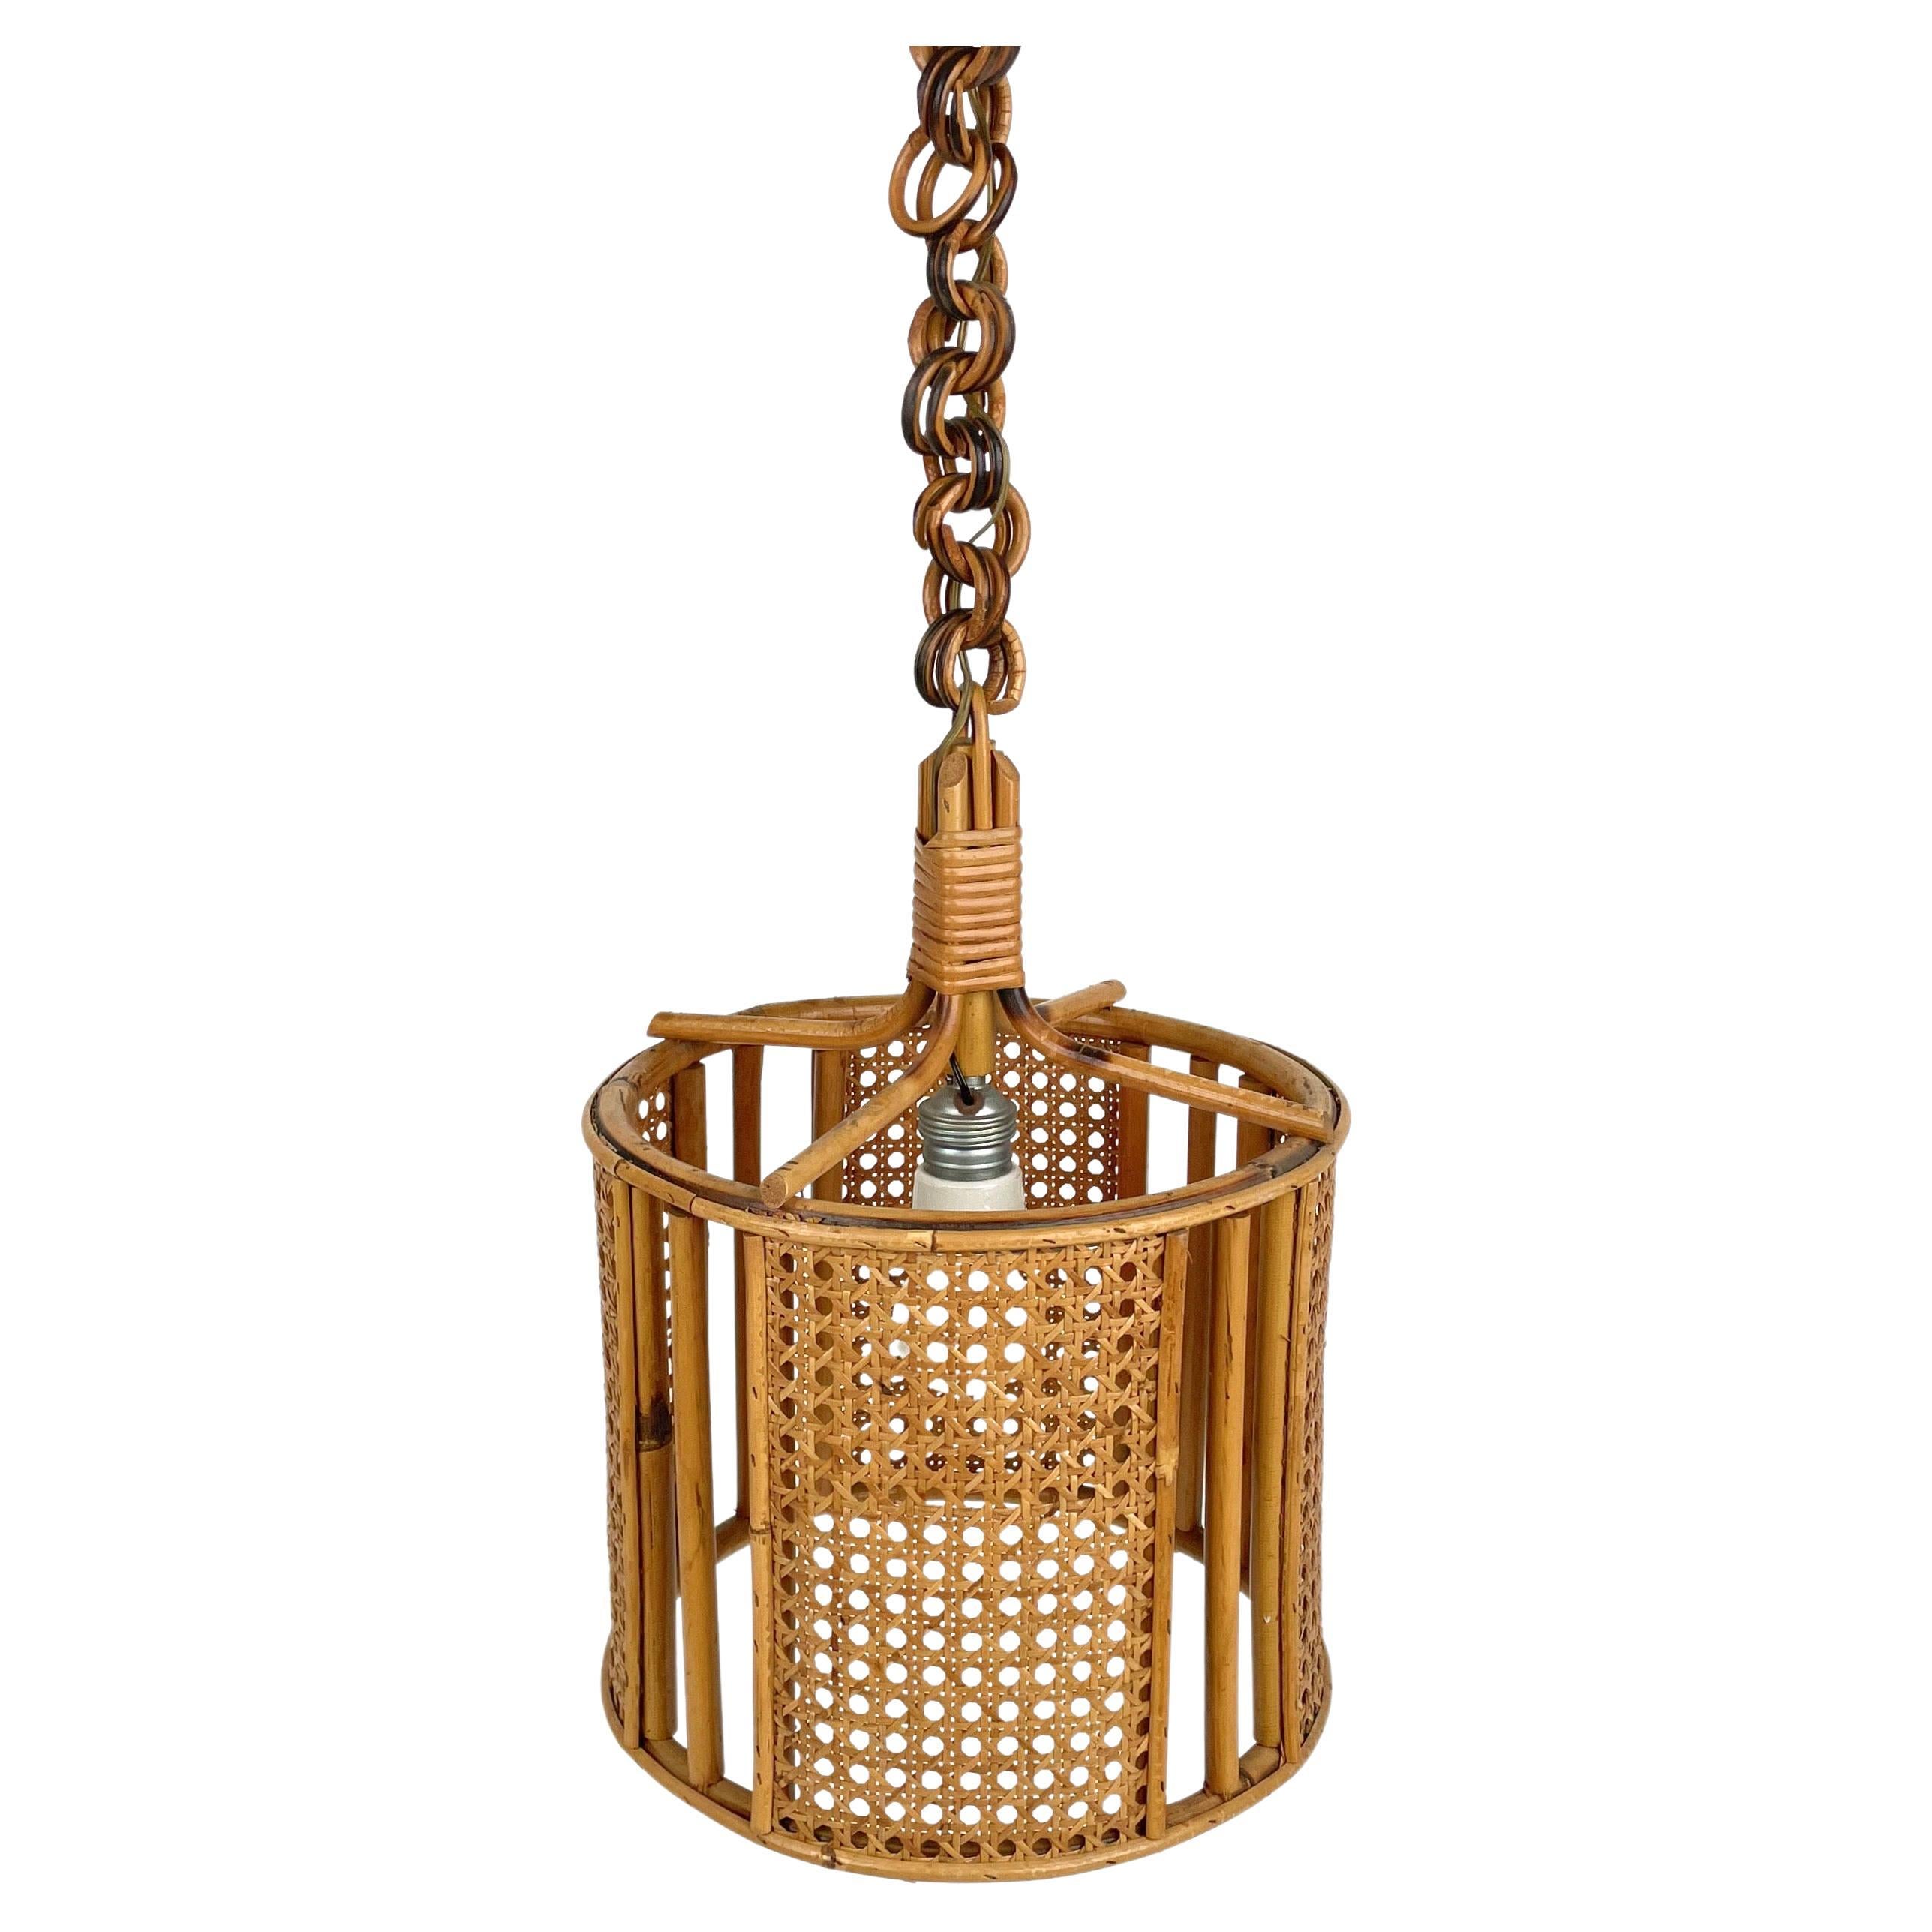 Midcentury French Riviera Rattan and Wicker Pendent, Italy 1960s